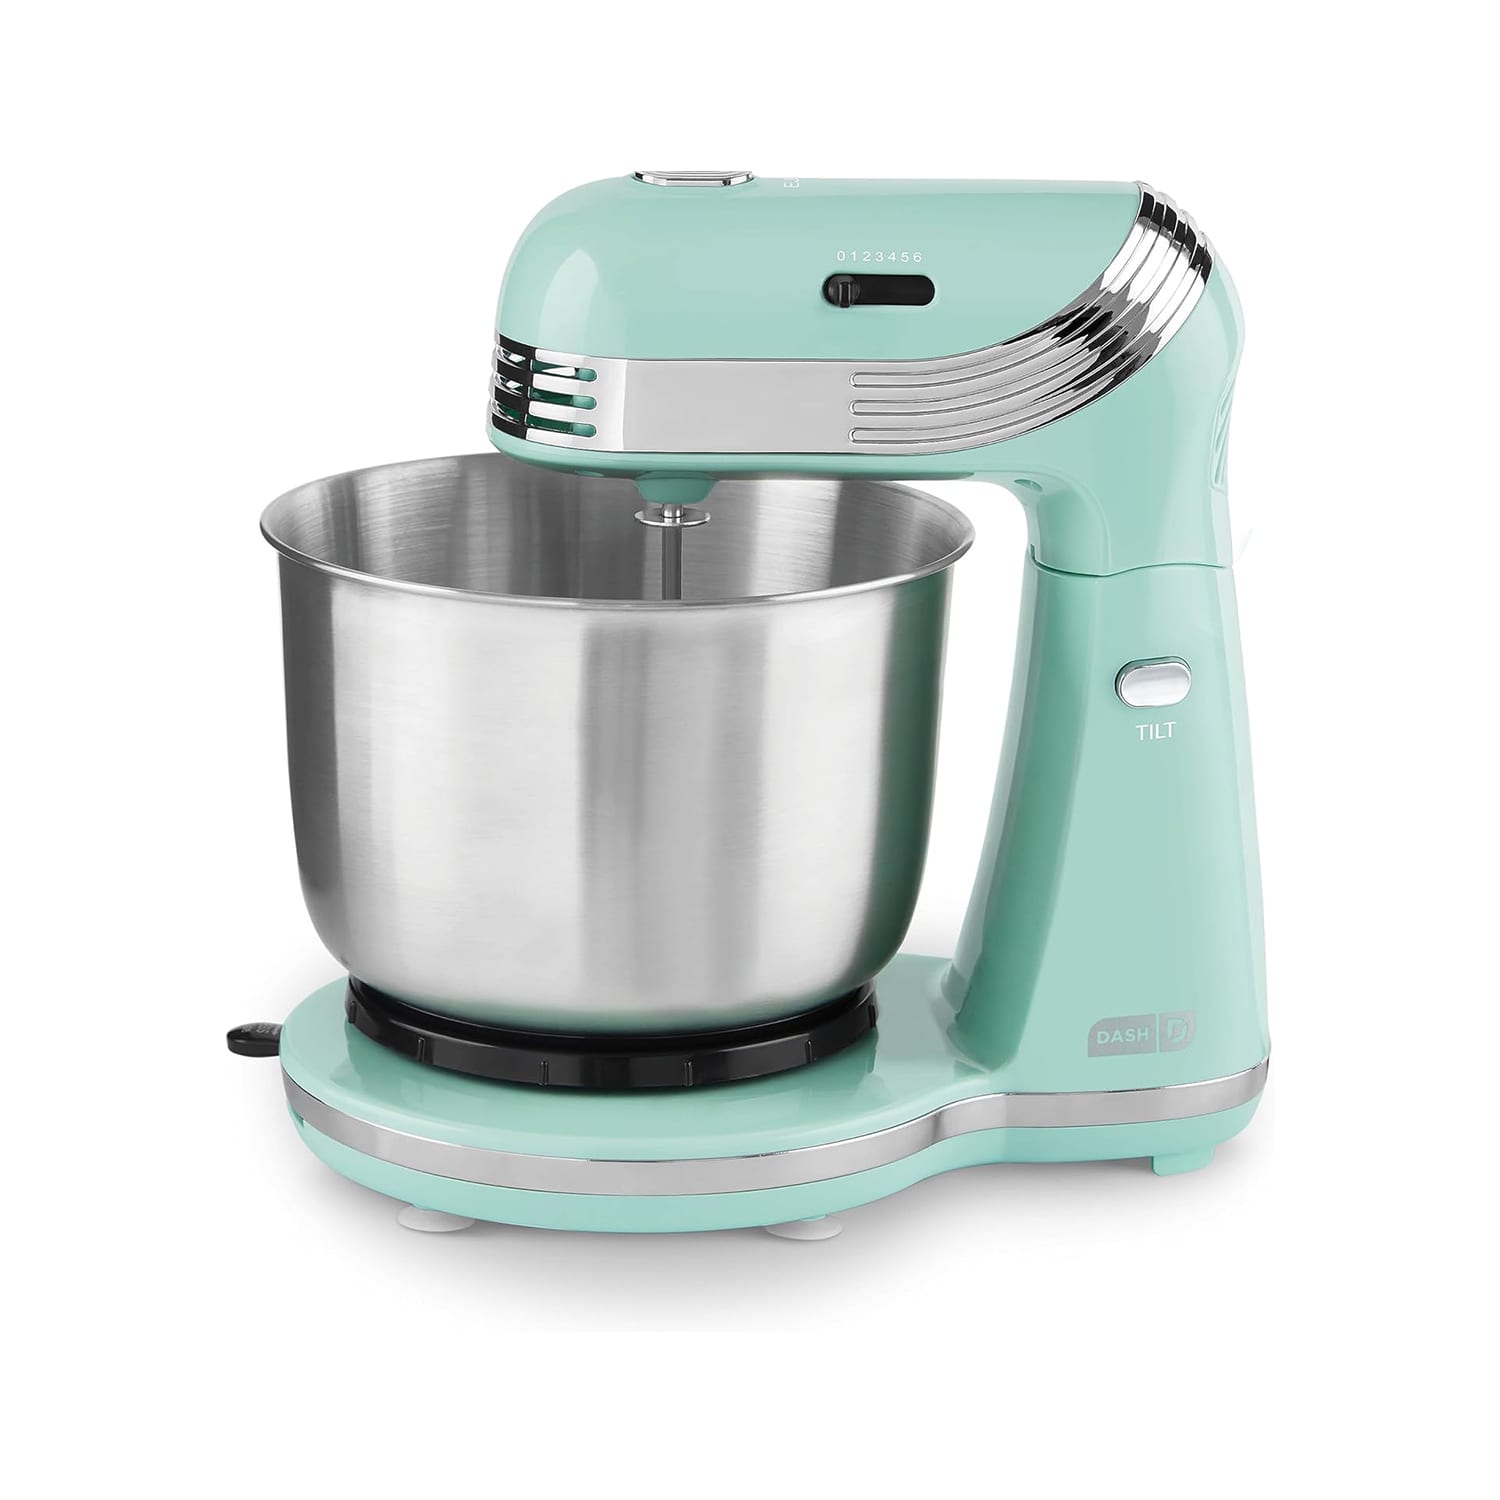 Aldi's $50 Stand Mixer Is Back for a Limited Time